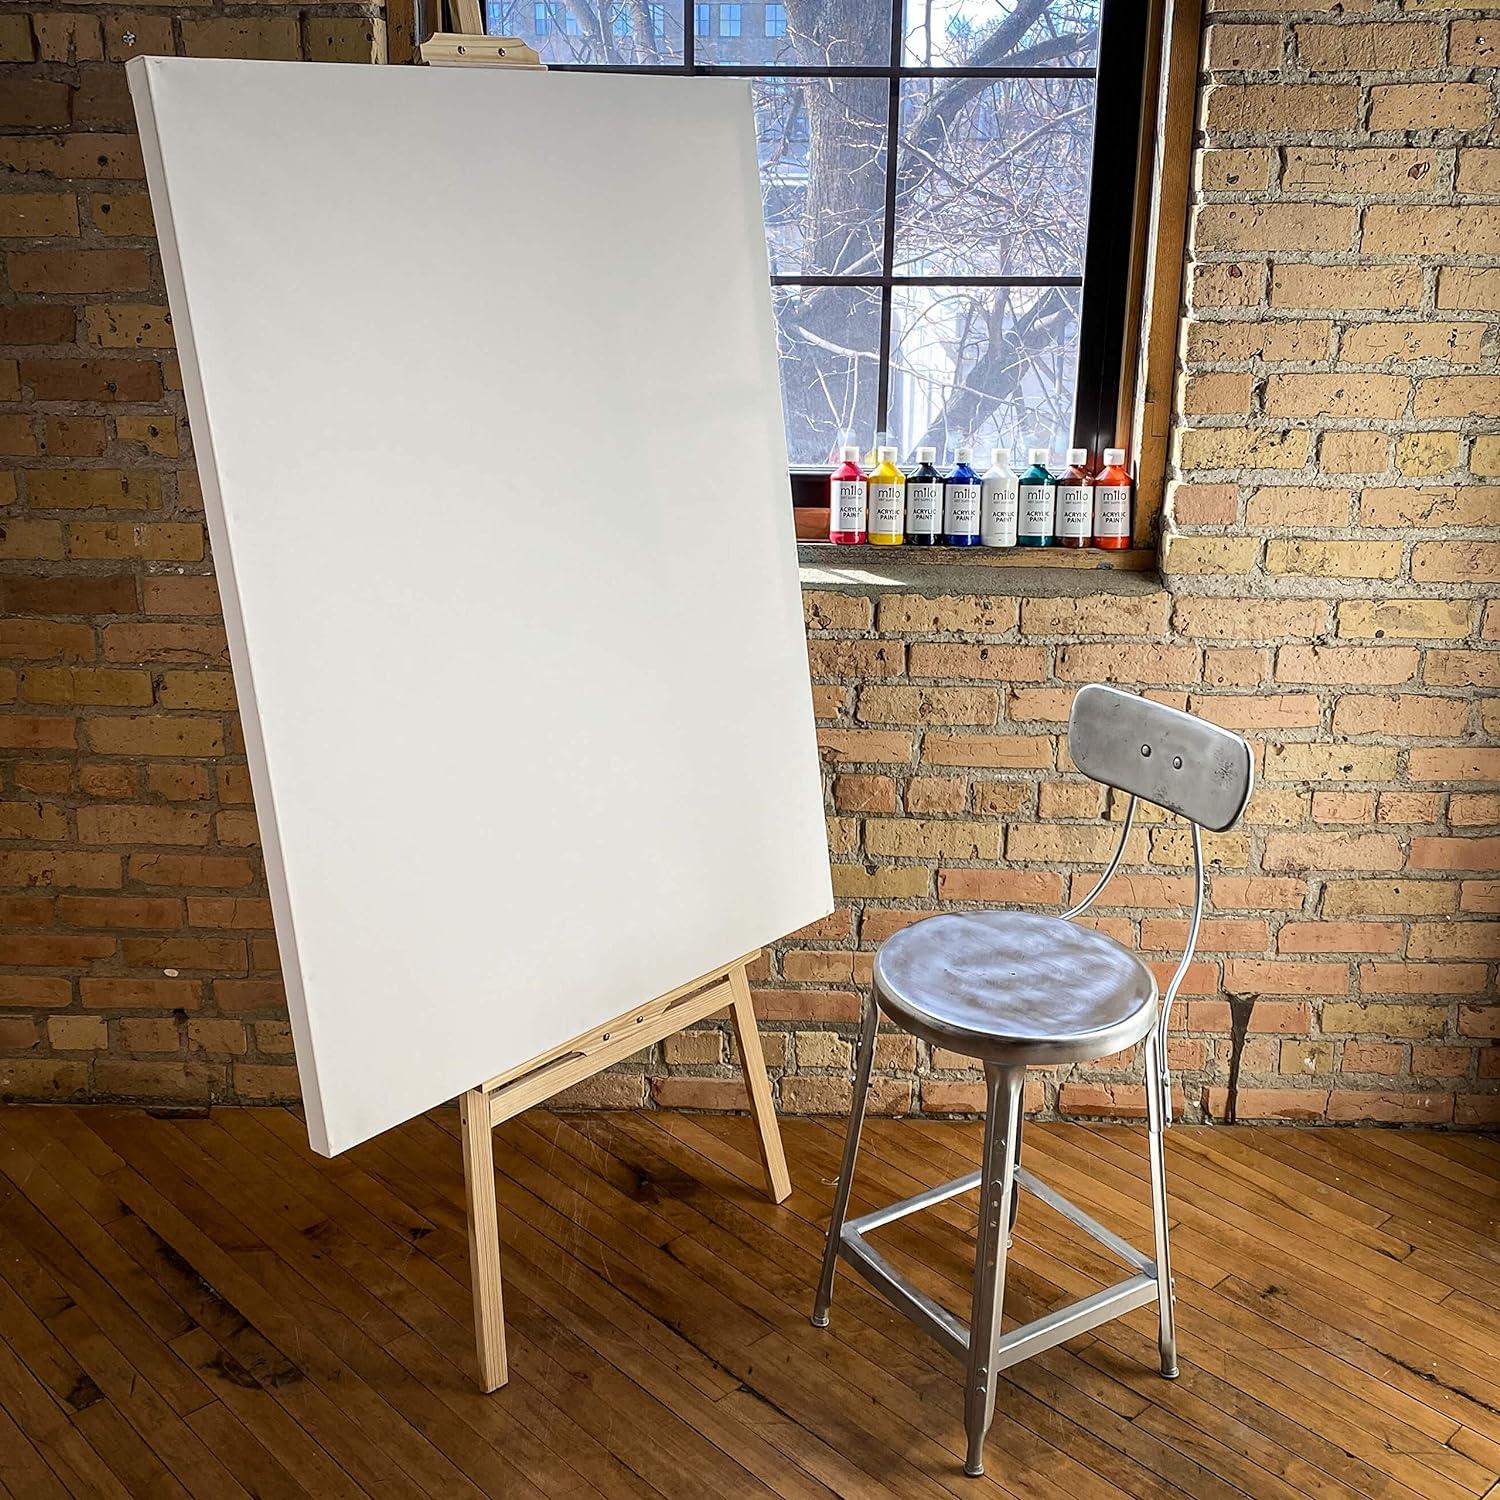 Large Canvas for Painting, 2 Pack 30x40 White Pre 30X40 (2-PACK